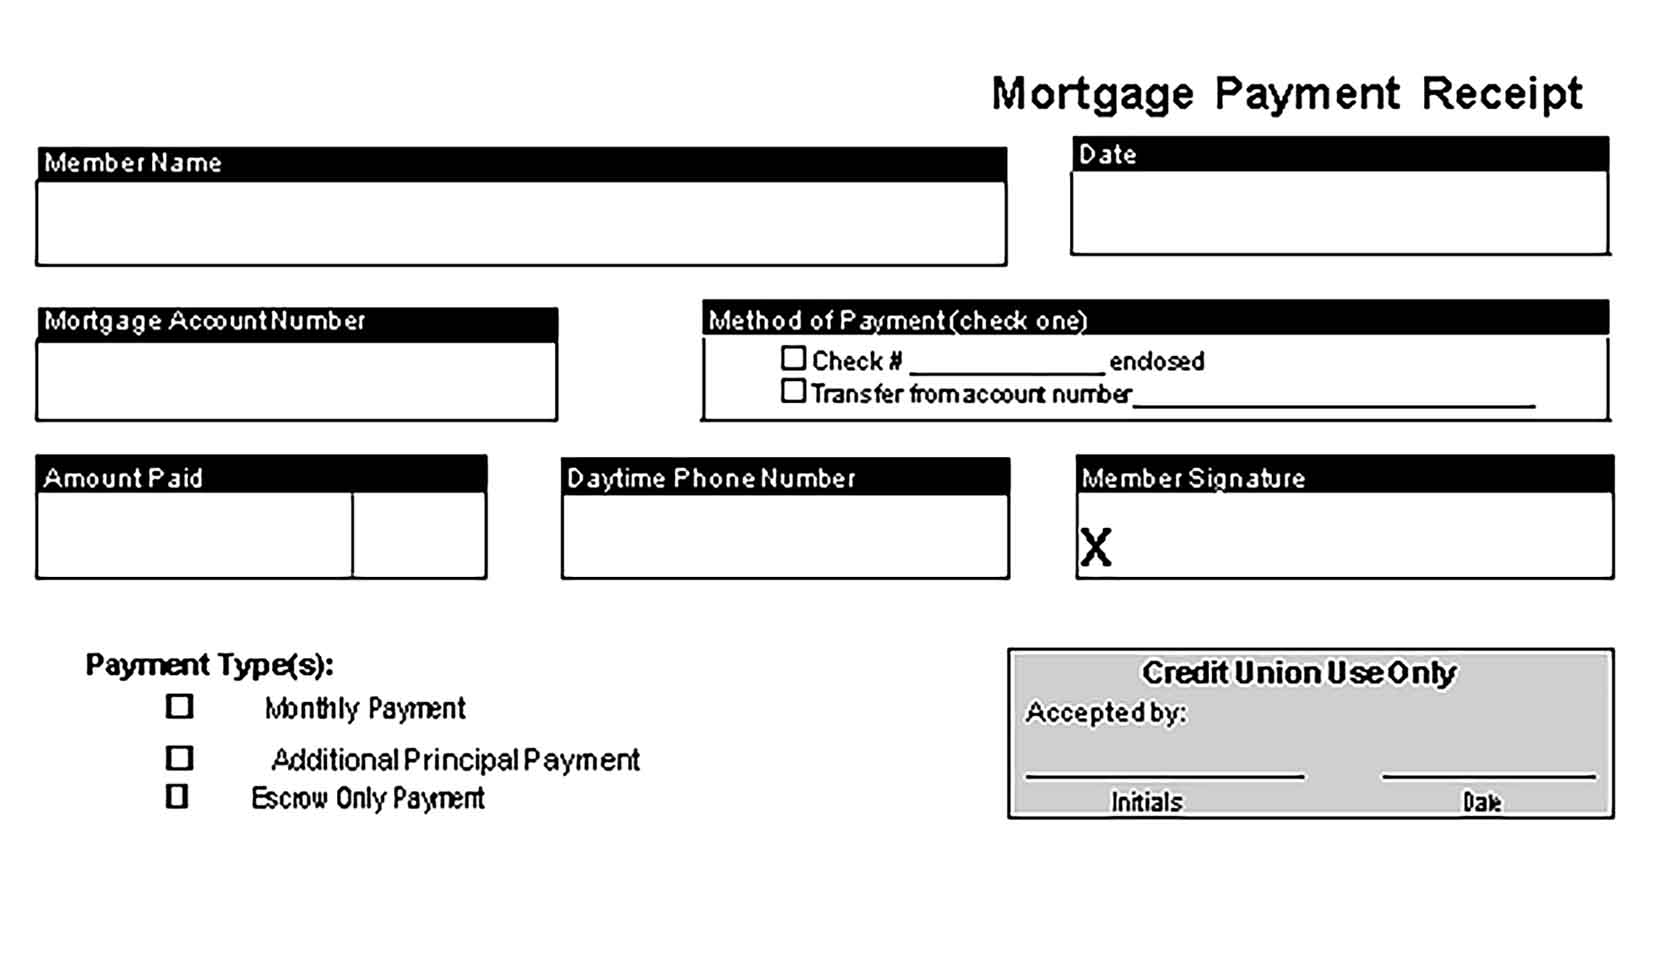 Sample Mortgage Payment Receipt Templates